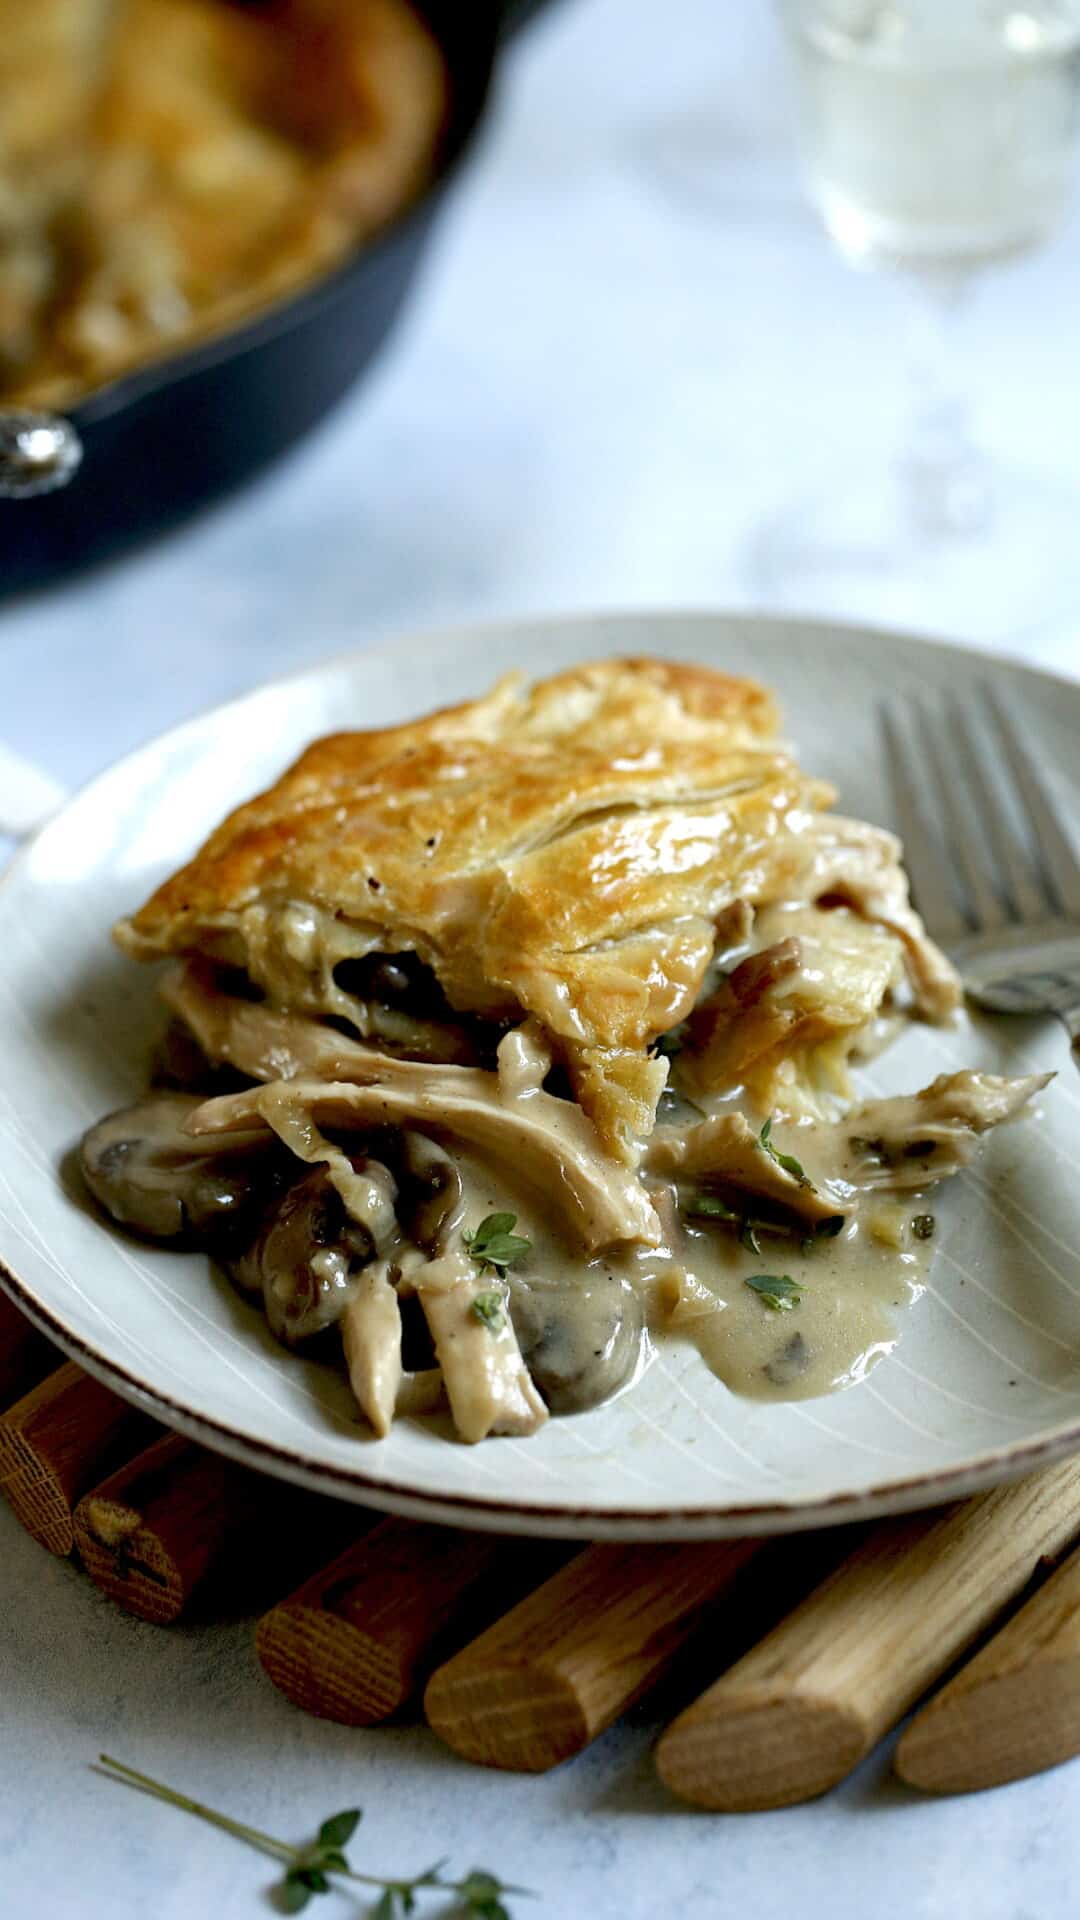 A slice of Chicken and Mushroom Pie on a plate with a fork